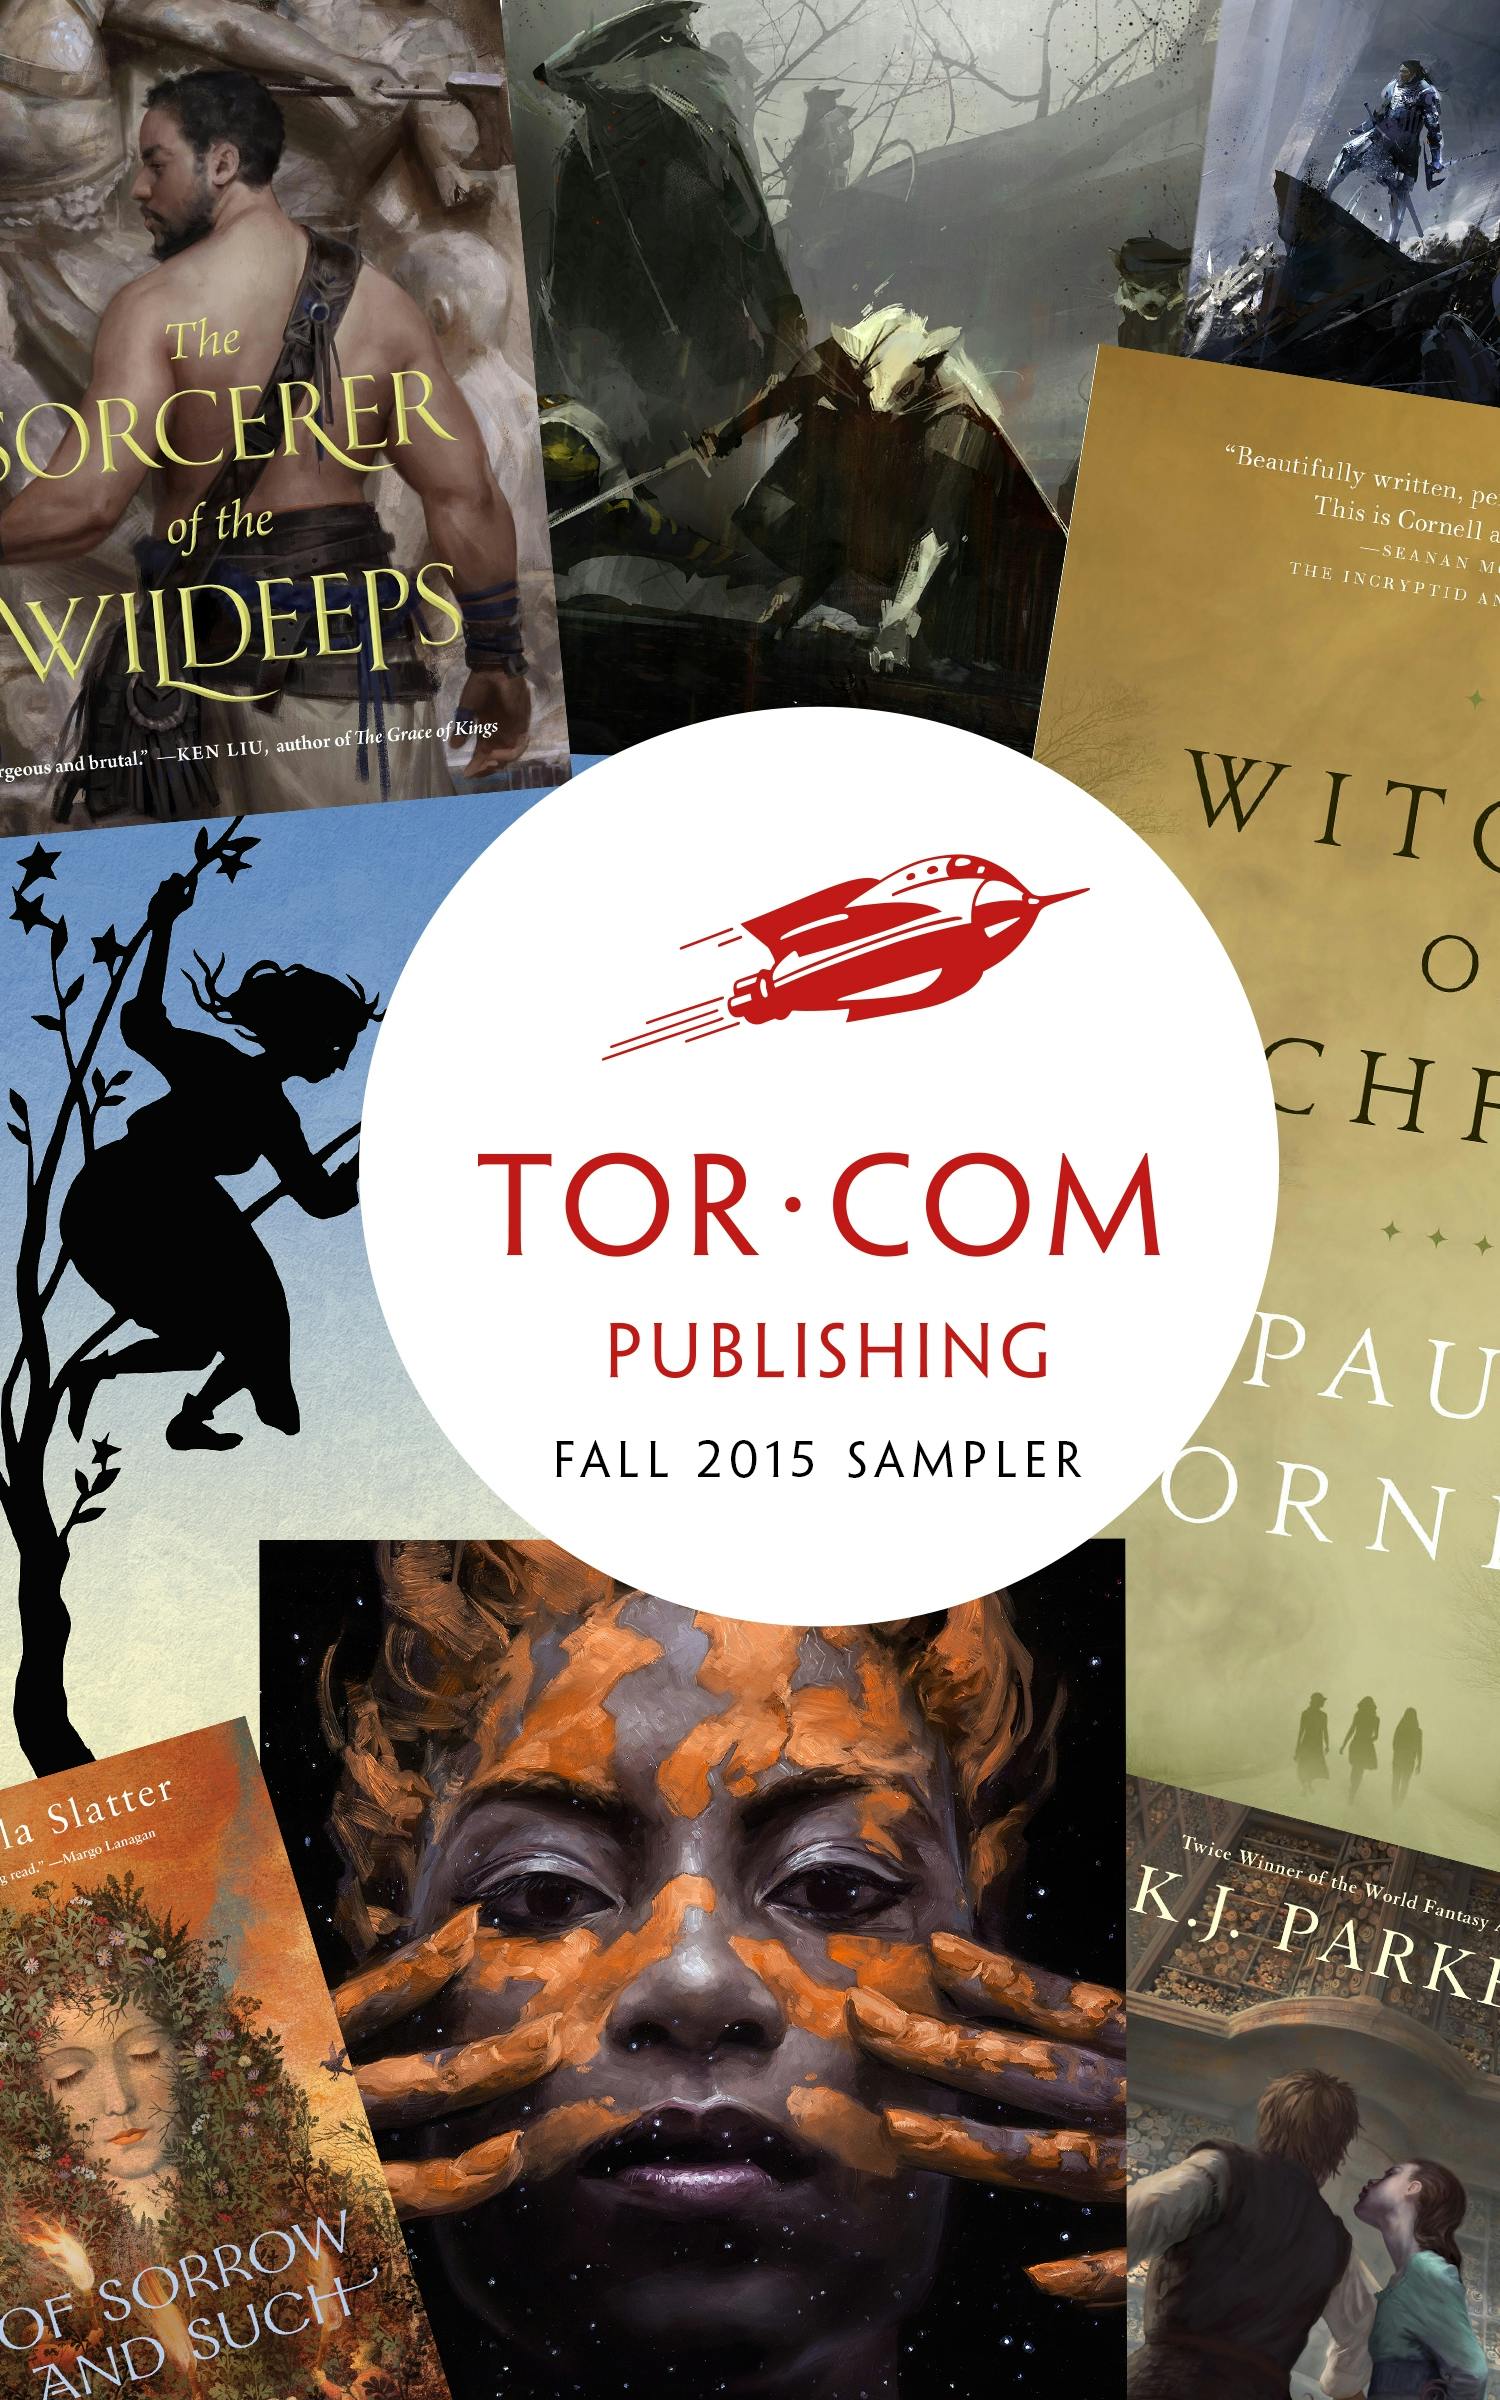 Cover for the book titled as: Tor.com Publishing Fall 2015 Sampler